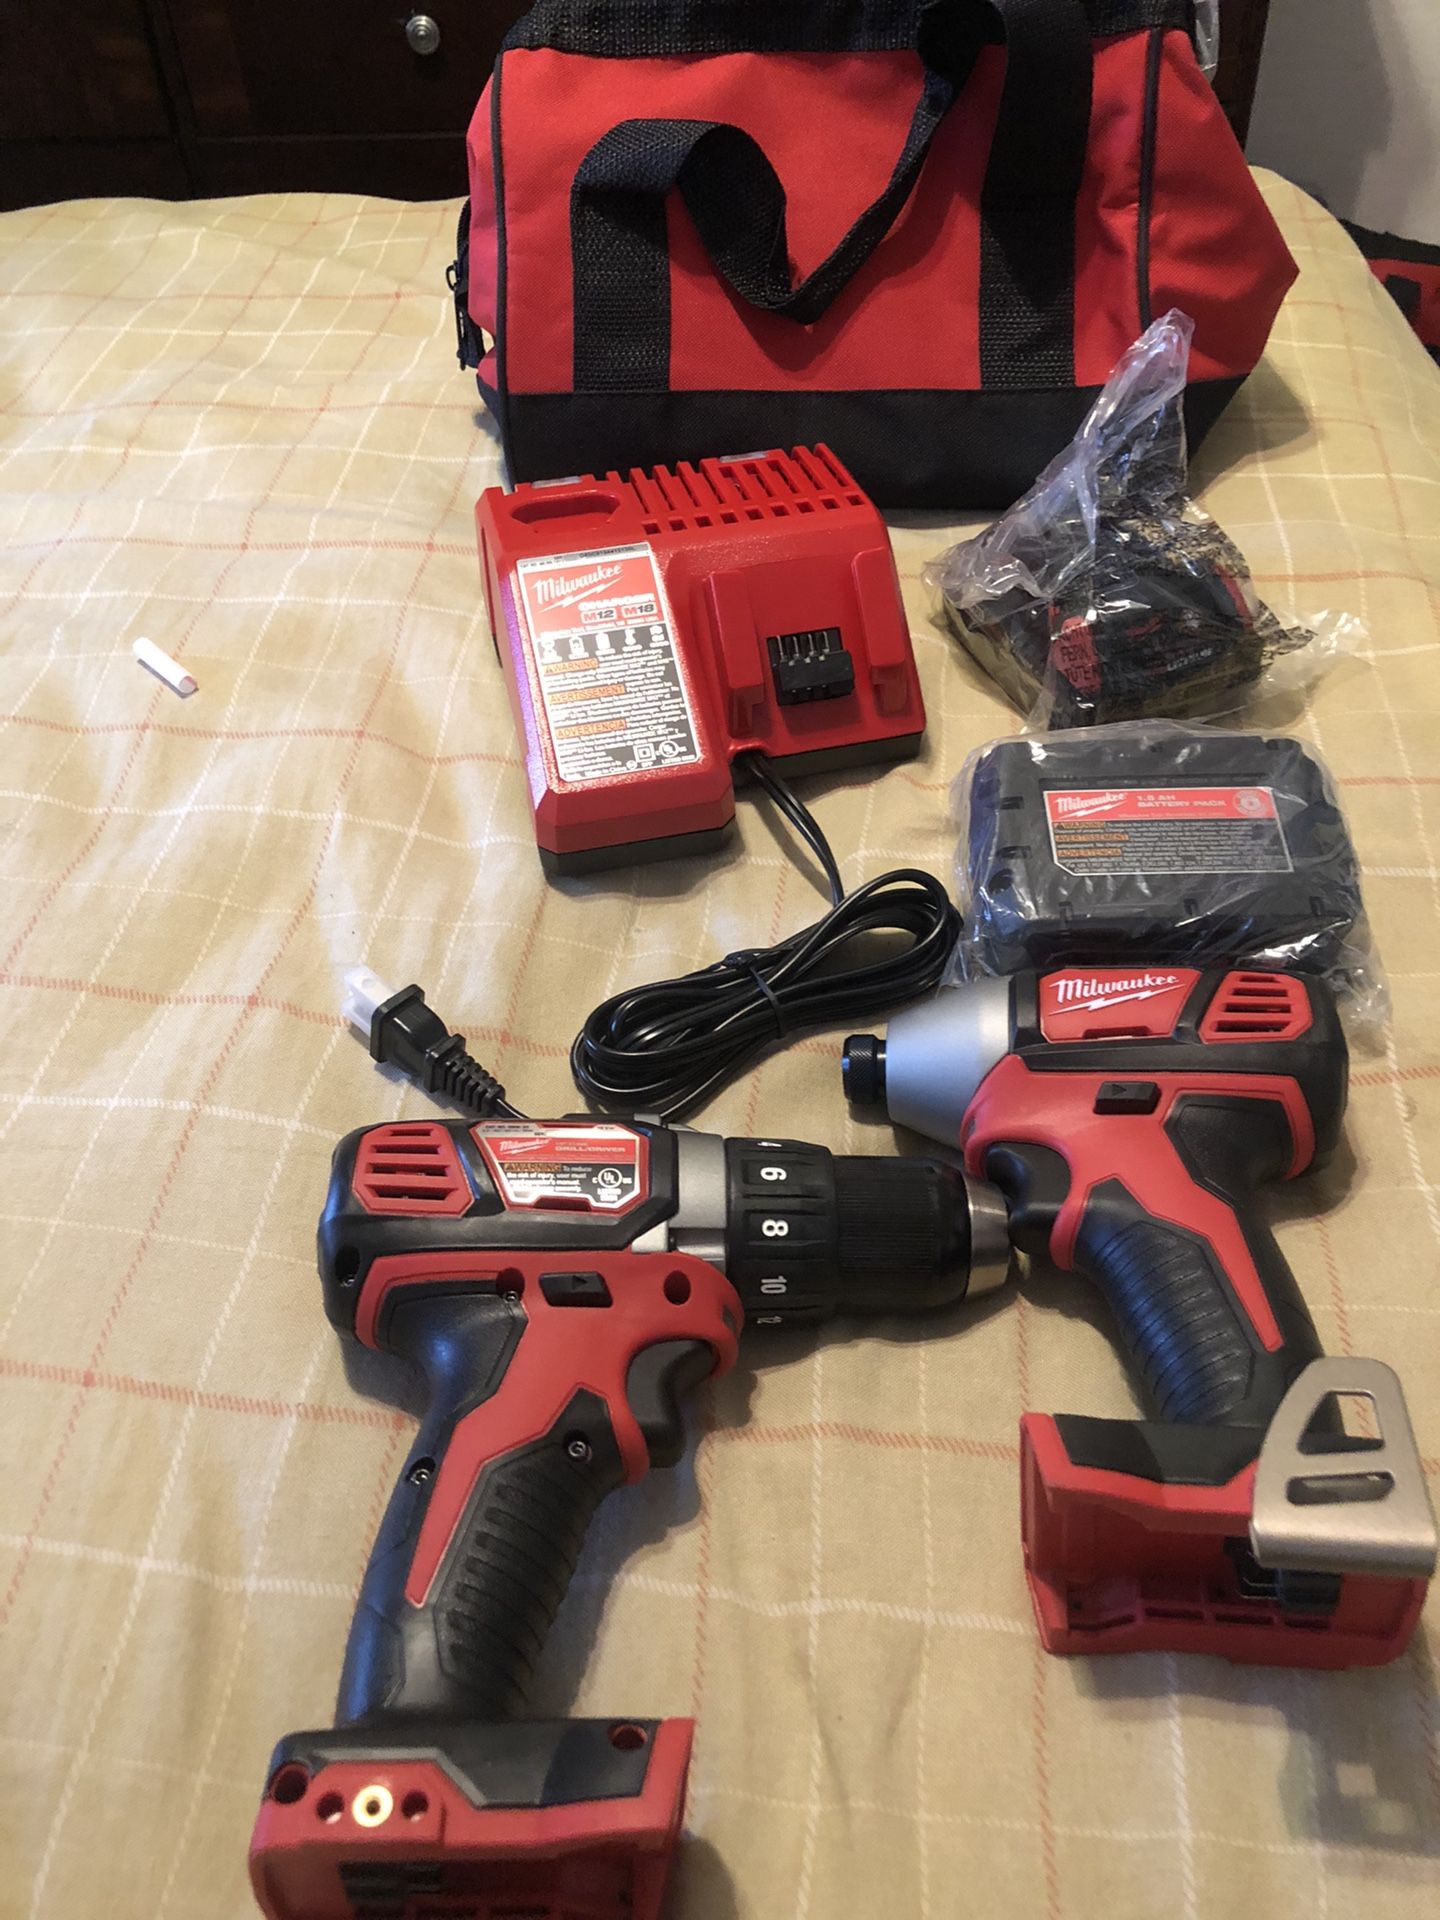 New Milwaukee 18 V drill set comes with two batteries one charger one impact gun and a drill this is not a hammer drill this is not a brushless set$1